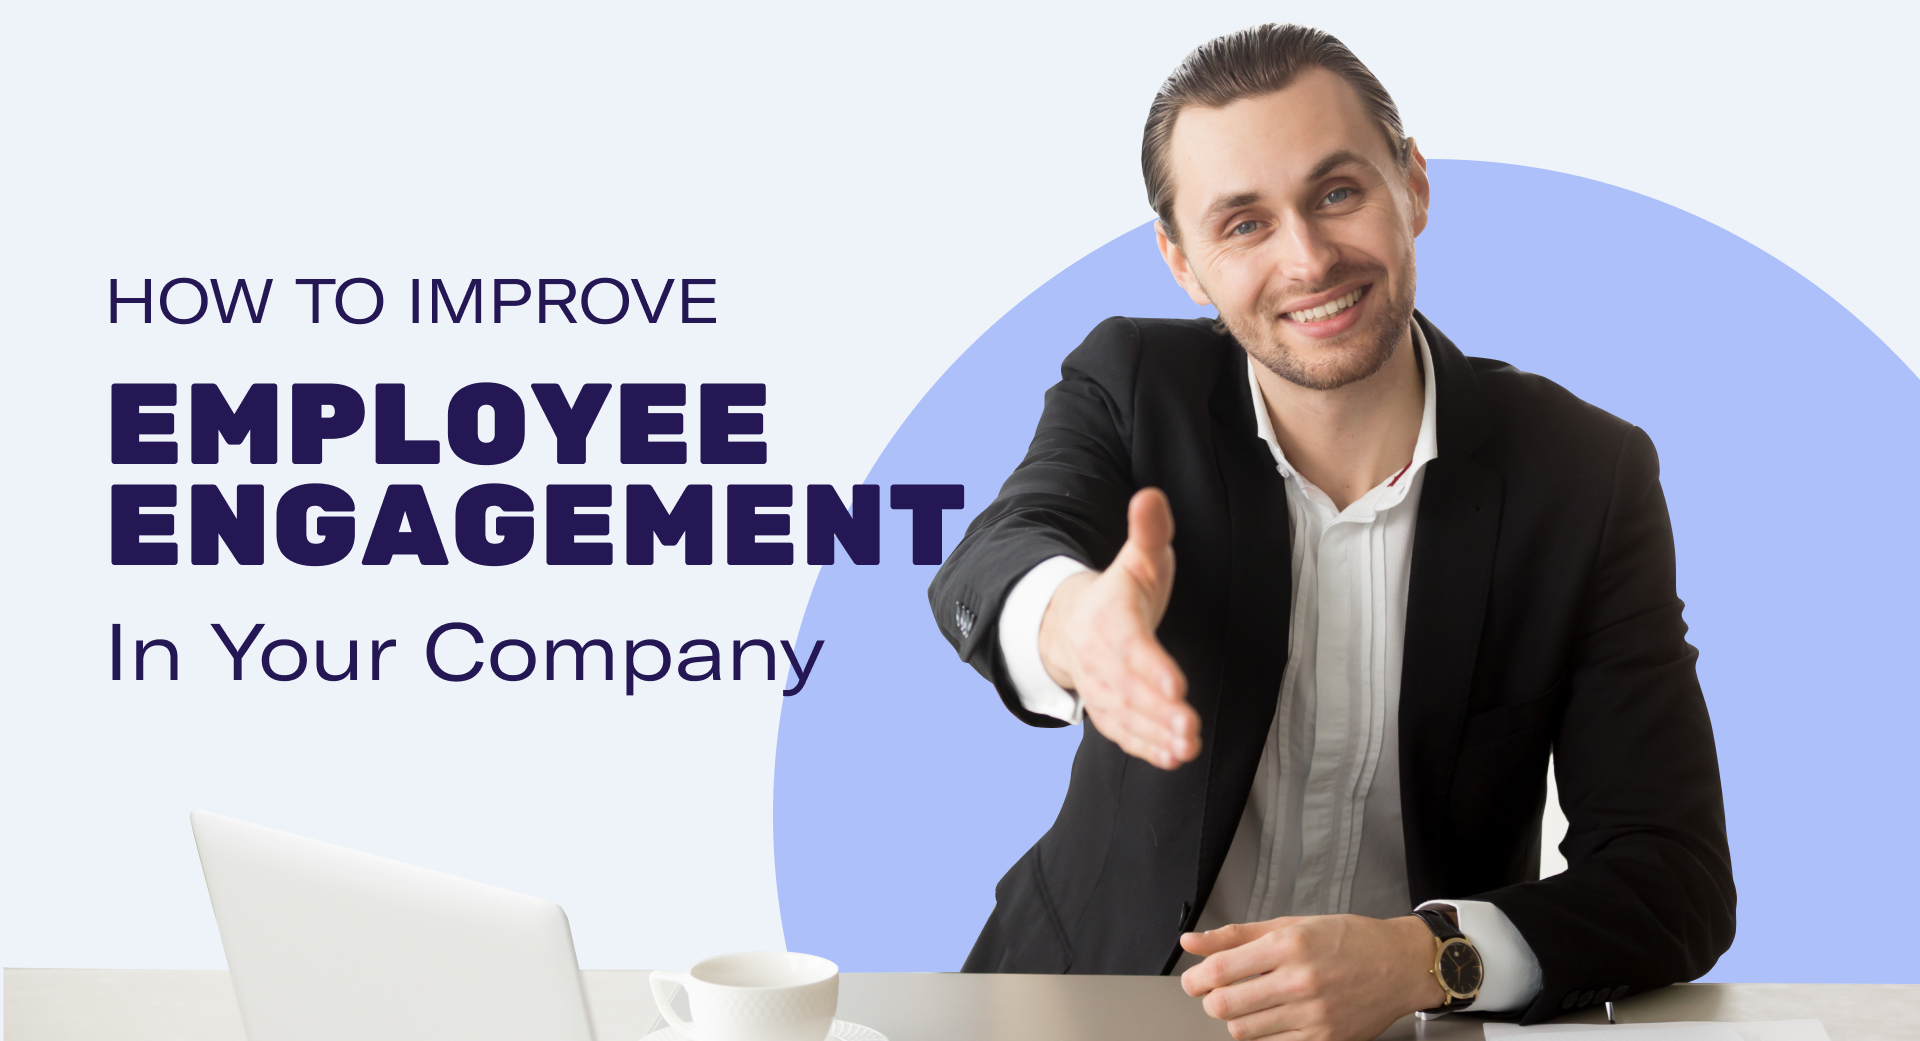 How to Improve Employee Engagement in Your Company